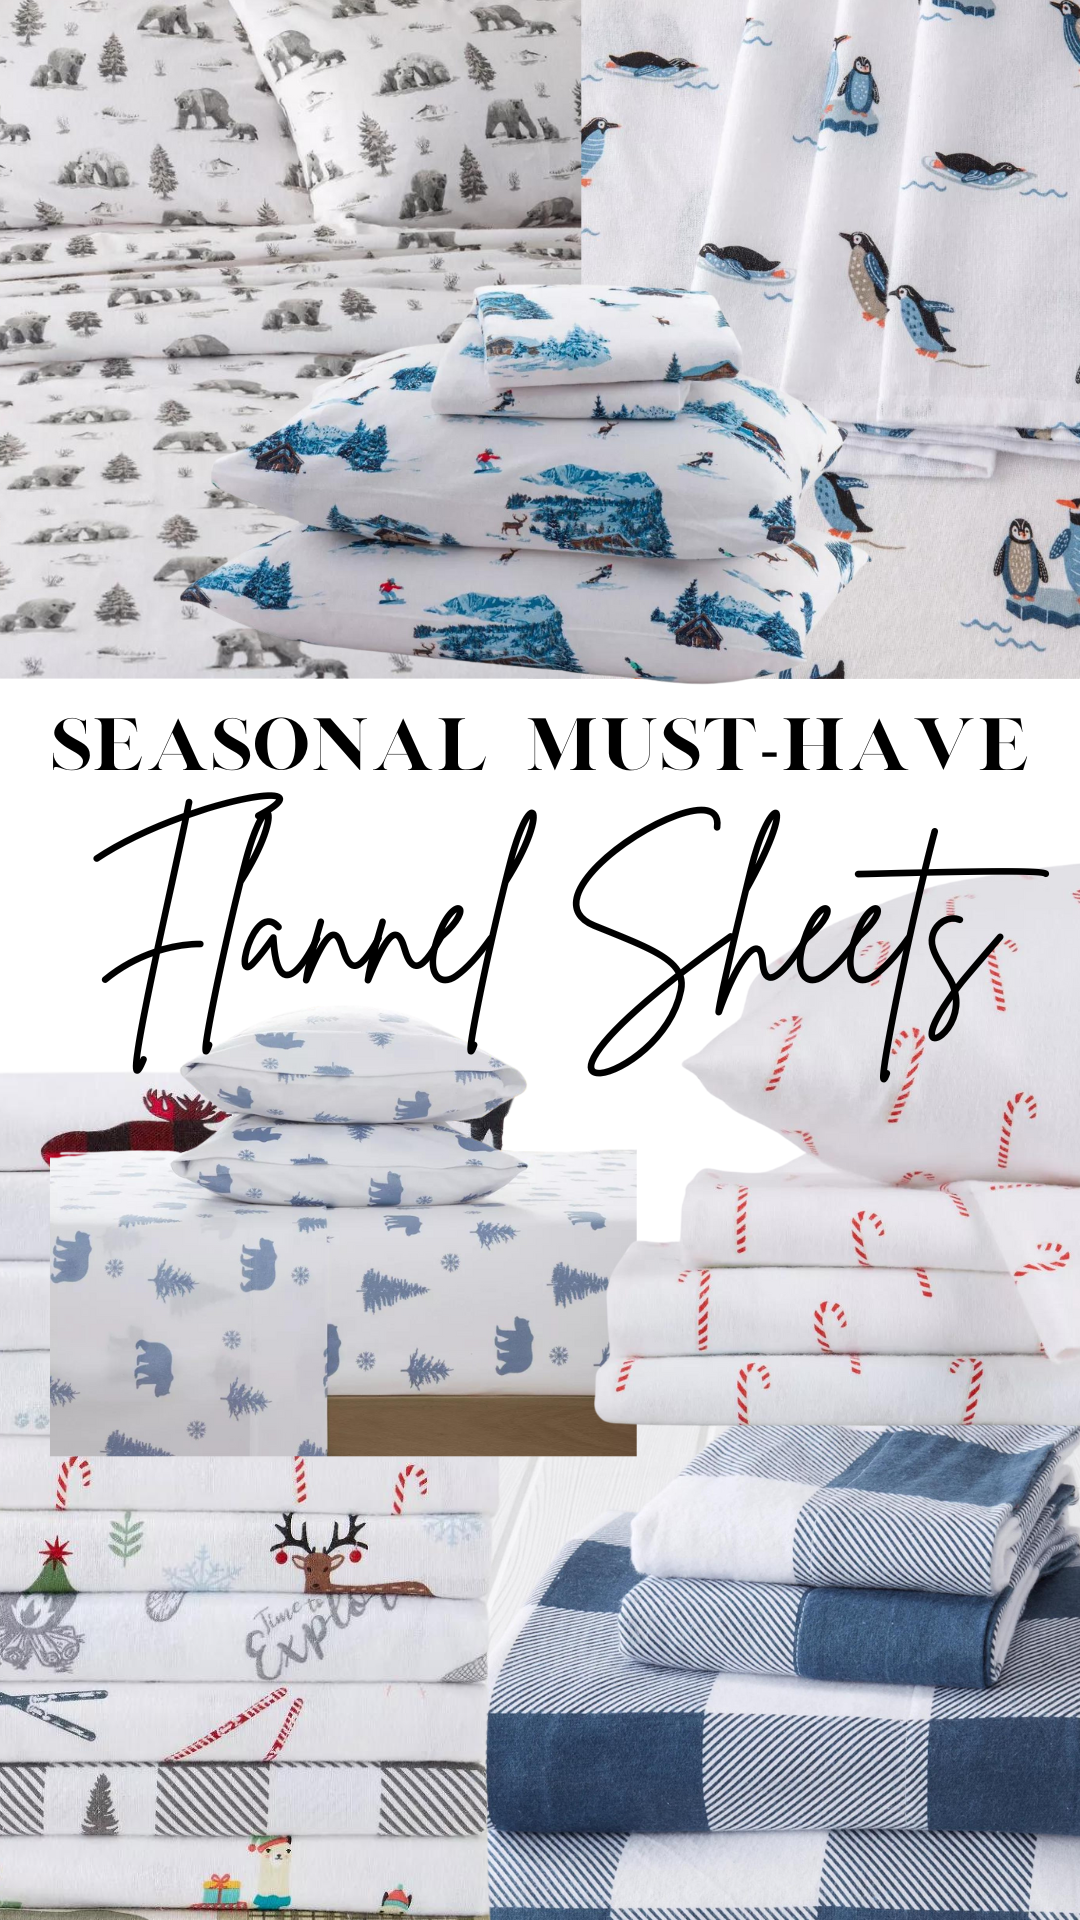 Seasonal Must-Have: Flannel Sheets